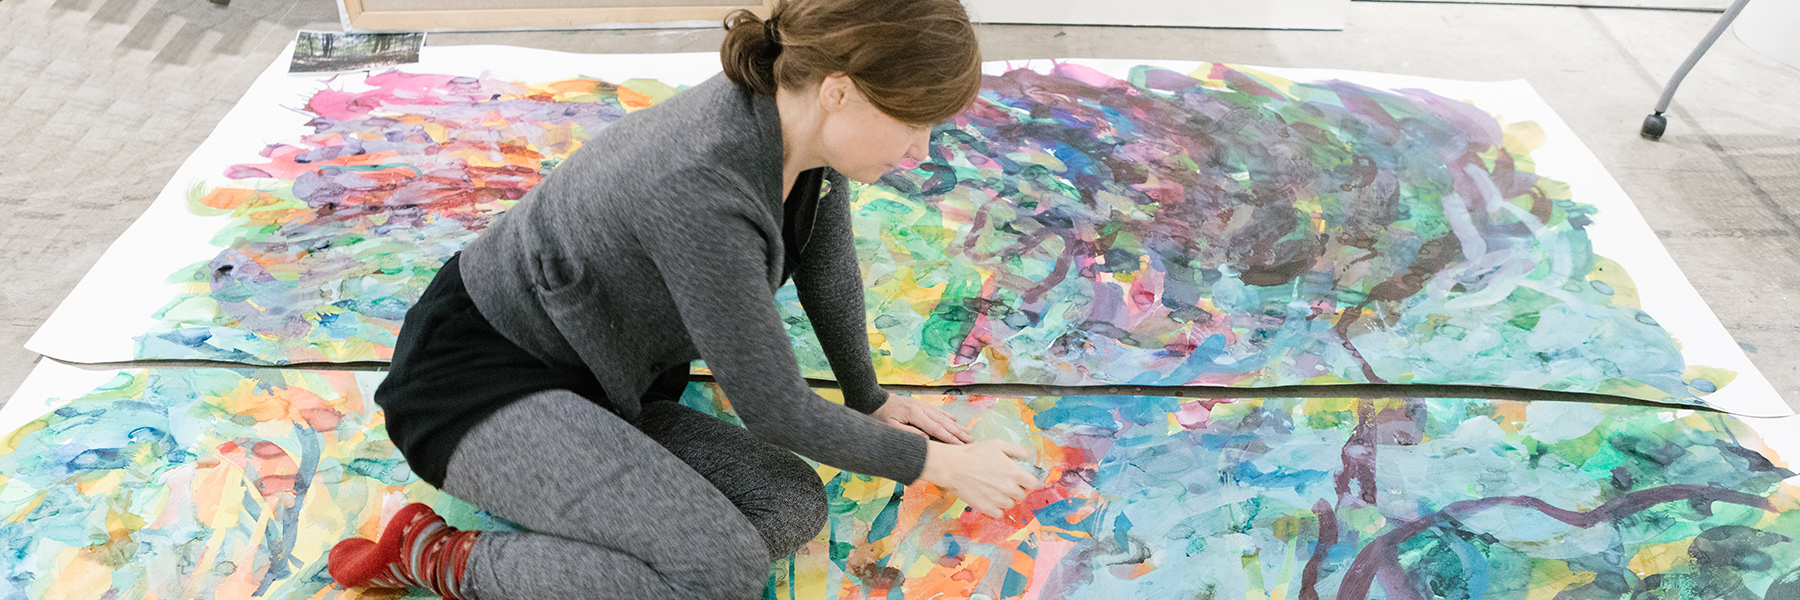 A person works on a large painting on the floor.